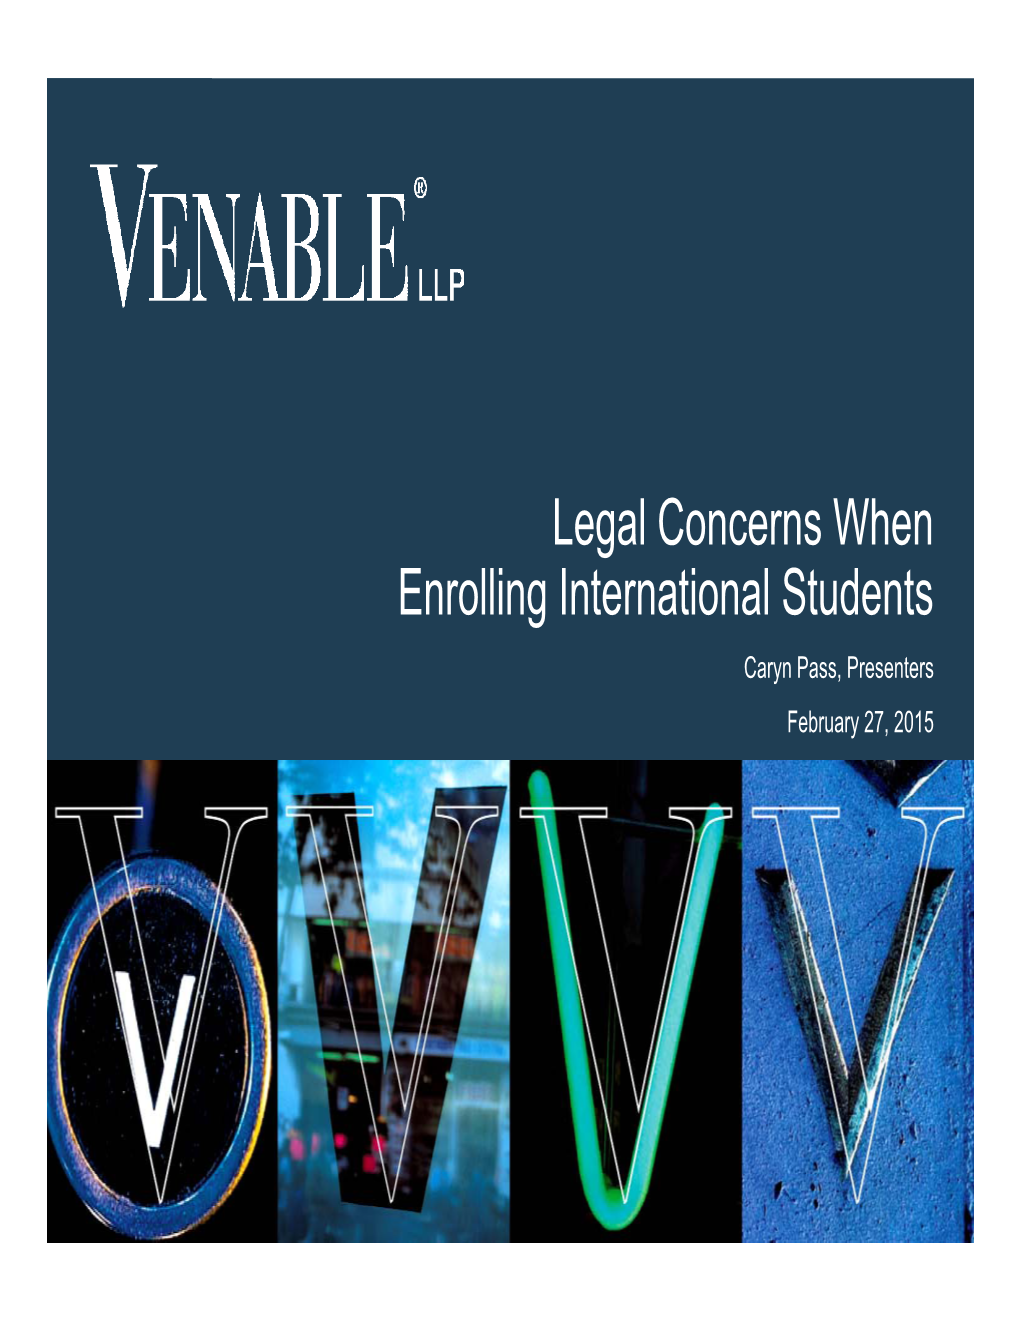 Legal Concerns When Enrolling International Students Caryn Pass, Presenters February 27, 2015